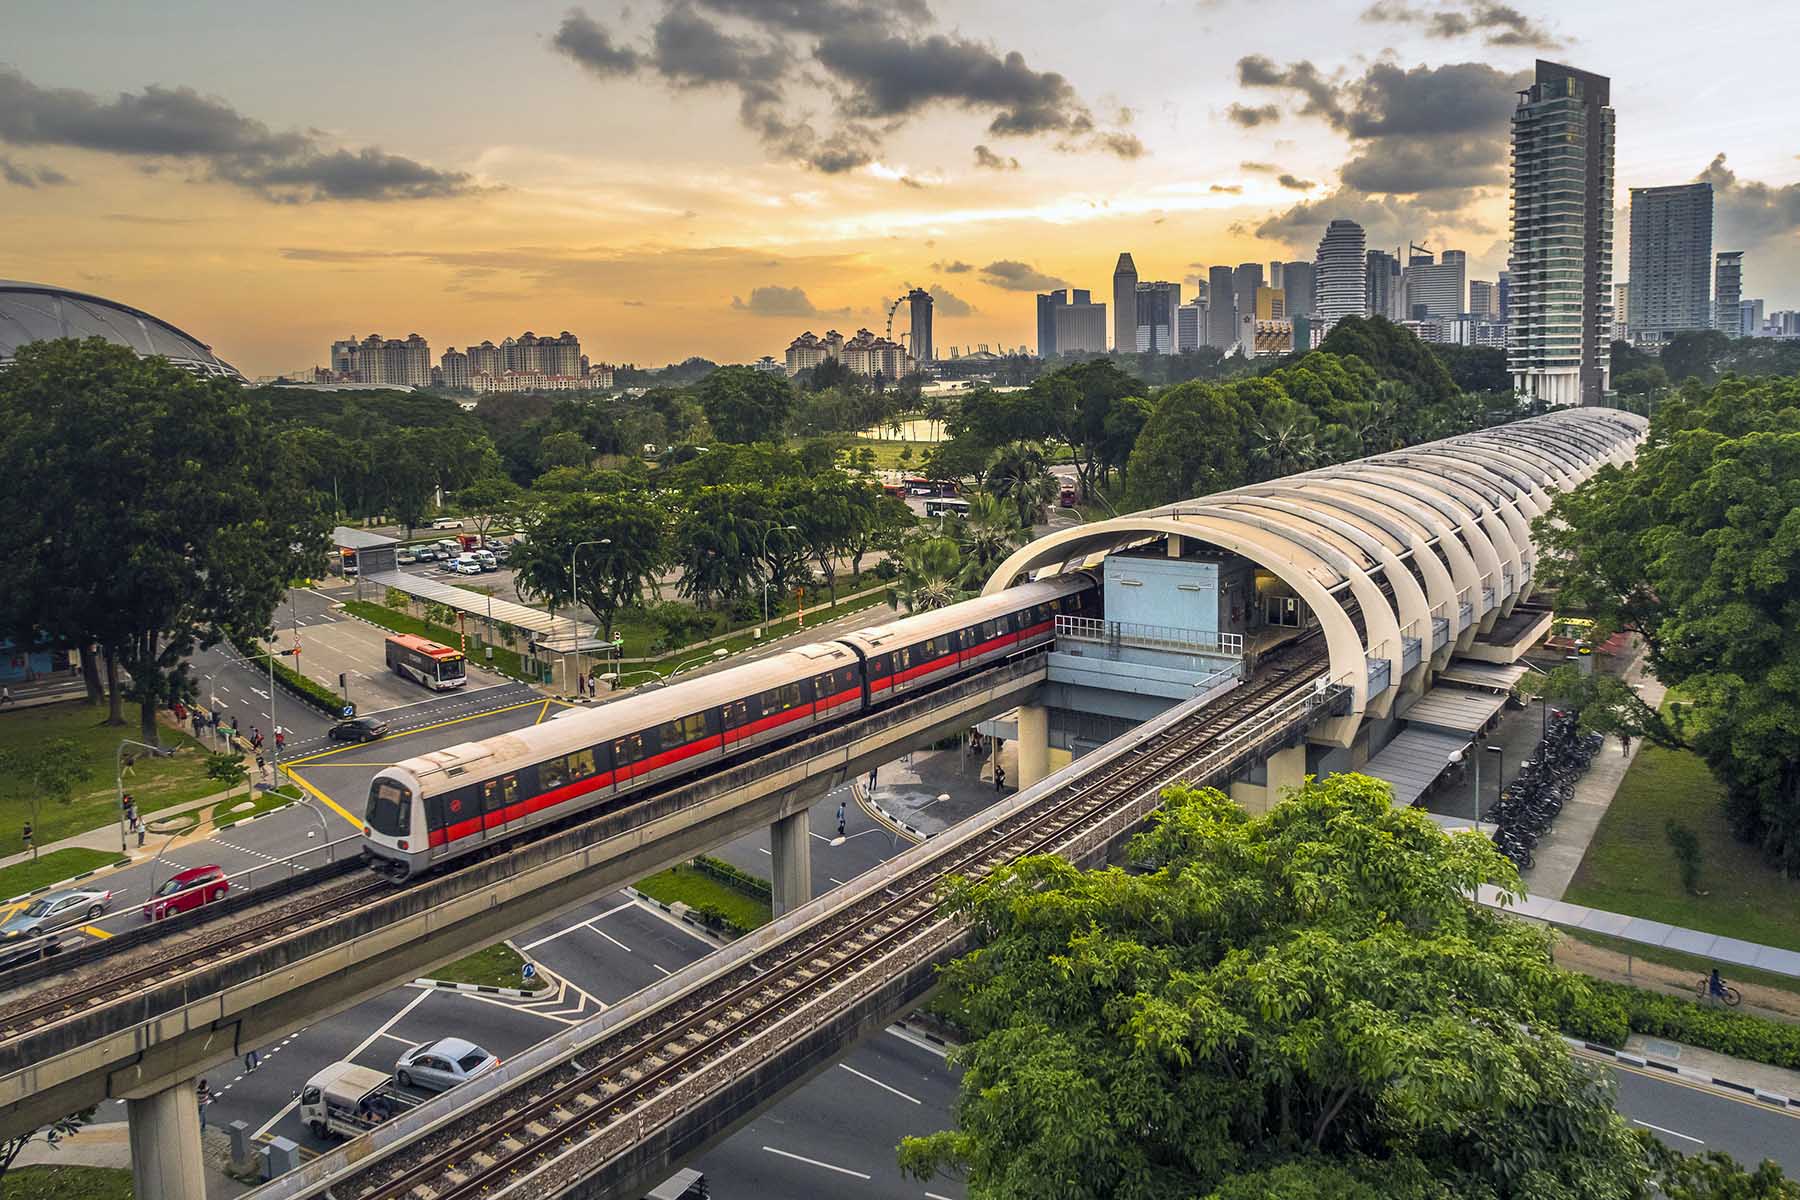 A view of Singapore mass rapid transit (MRT) train service in central Kallang station during sunset with Singapore city skyline in background. 